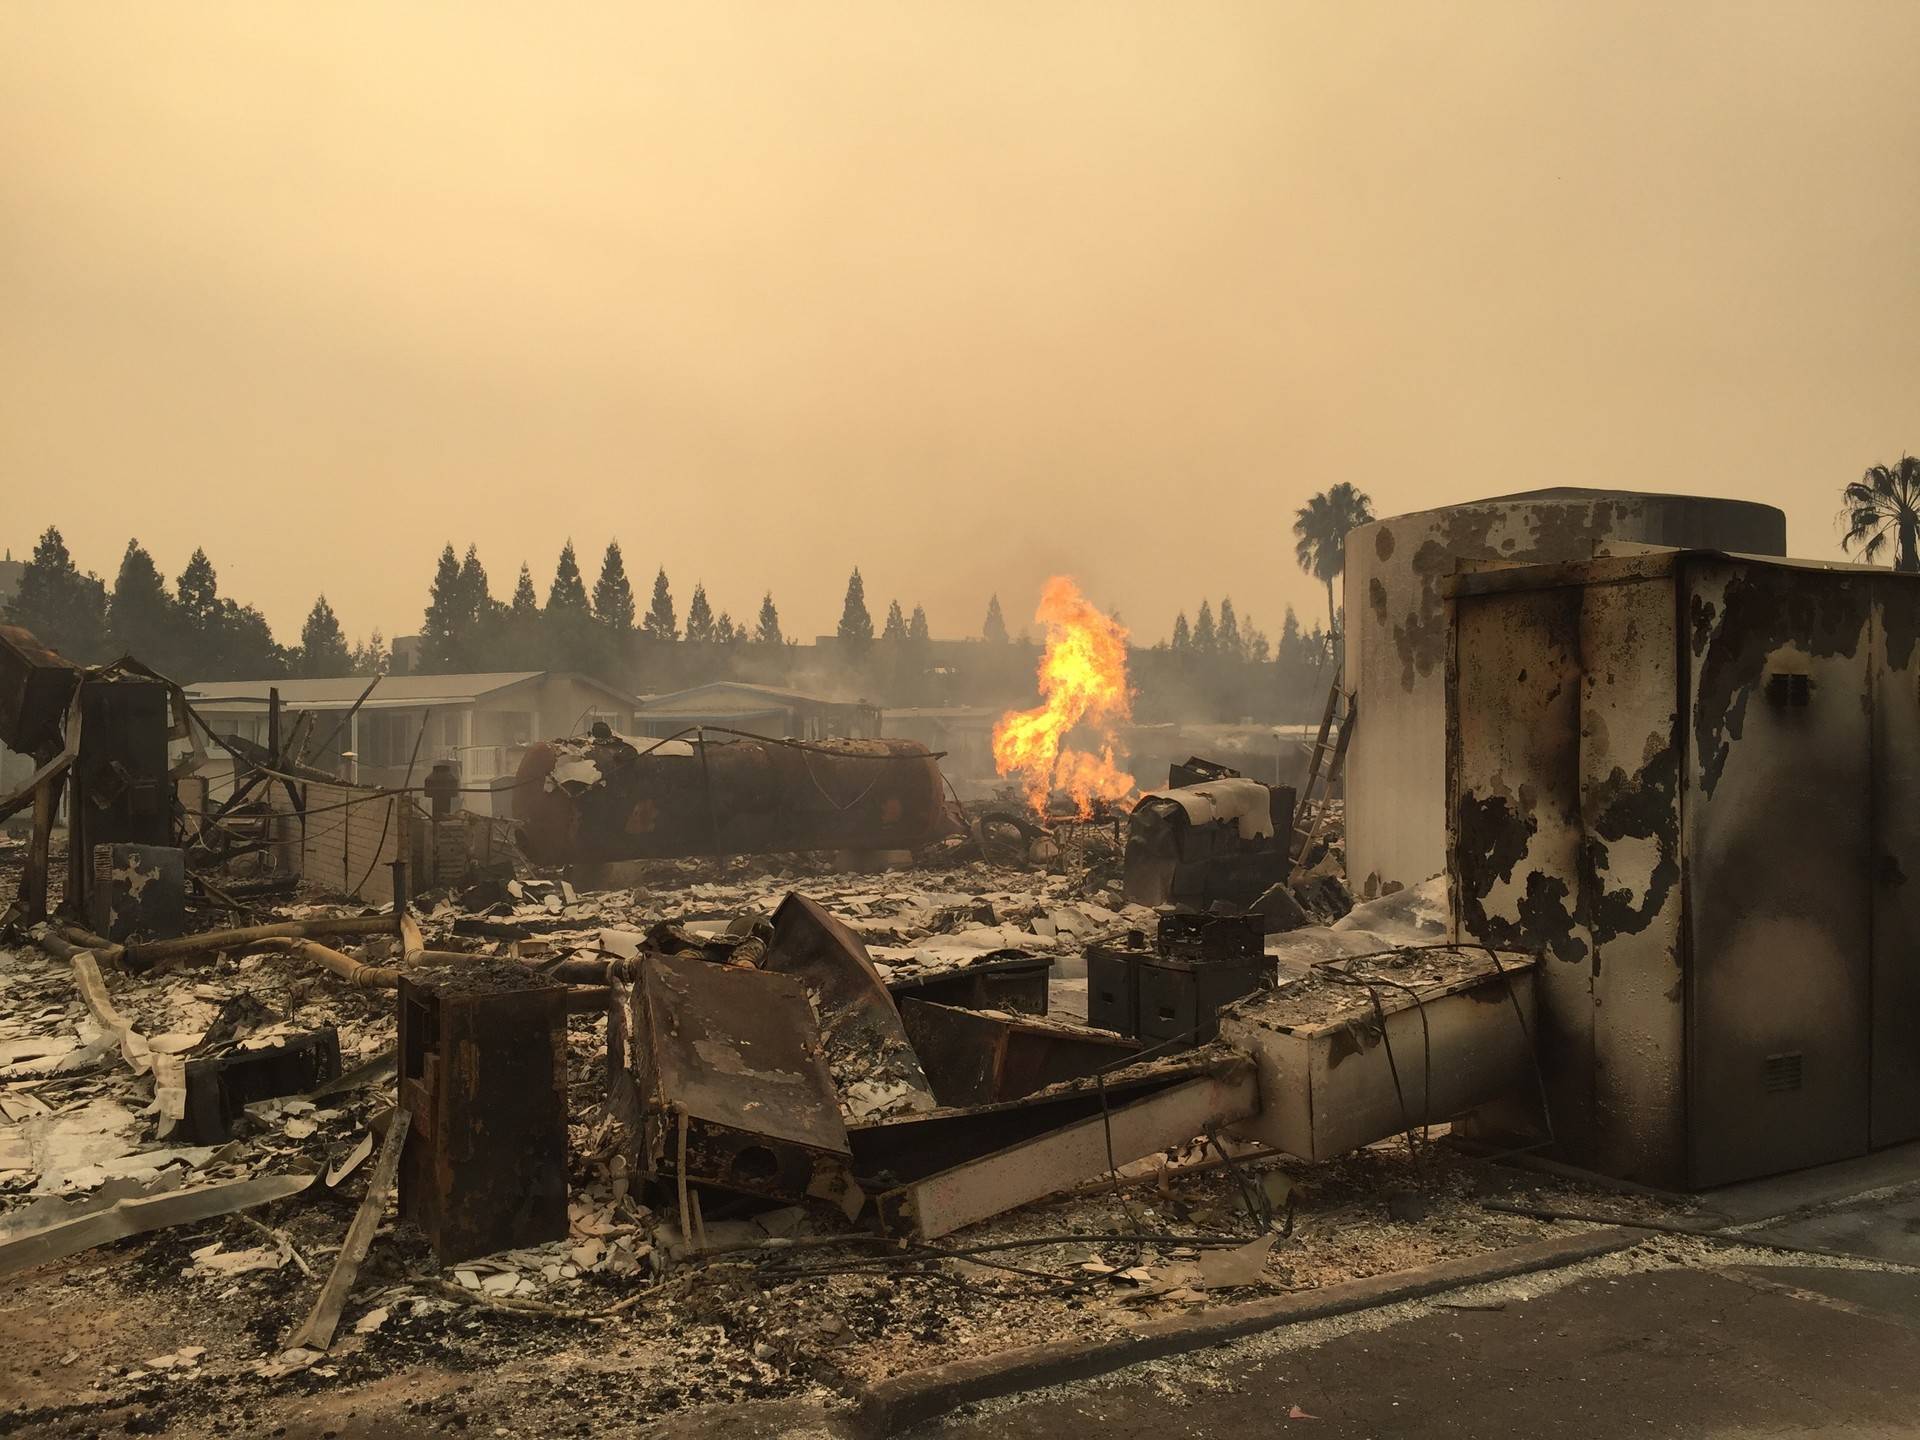 Approximately 90 percent of homes were destroyed at Journey's End Mobile Home Park in Santa Rosa. Photo taken Oct. 9, 2017. Jeremy Siegel/KQED